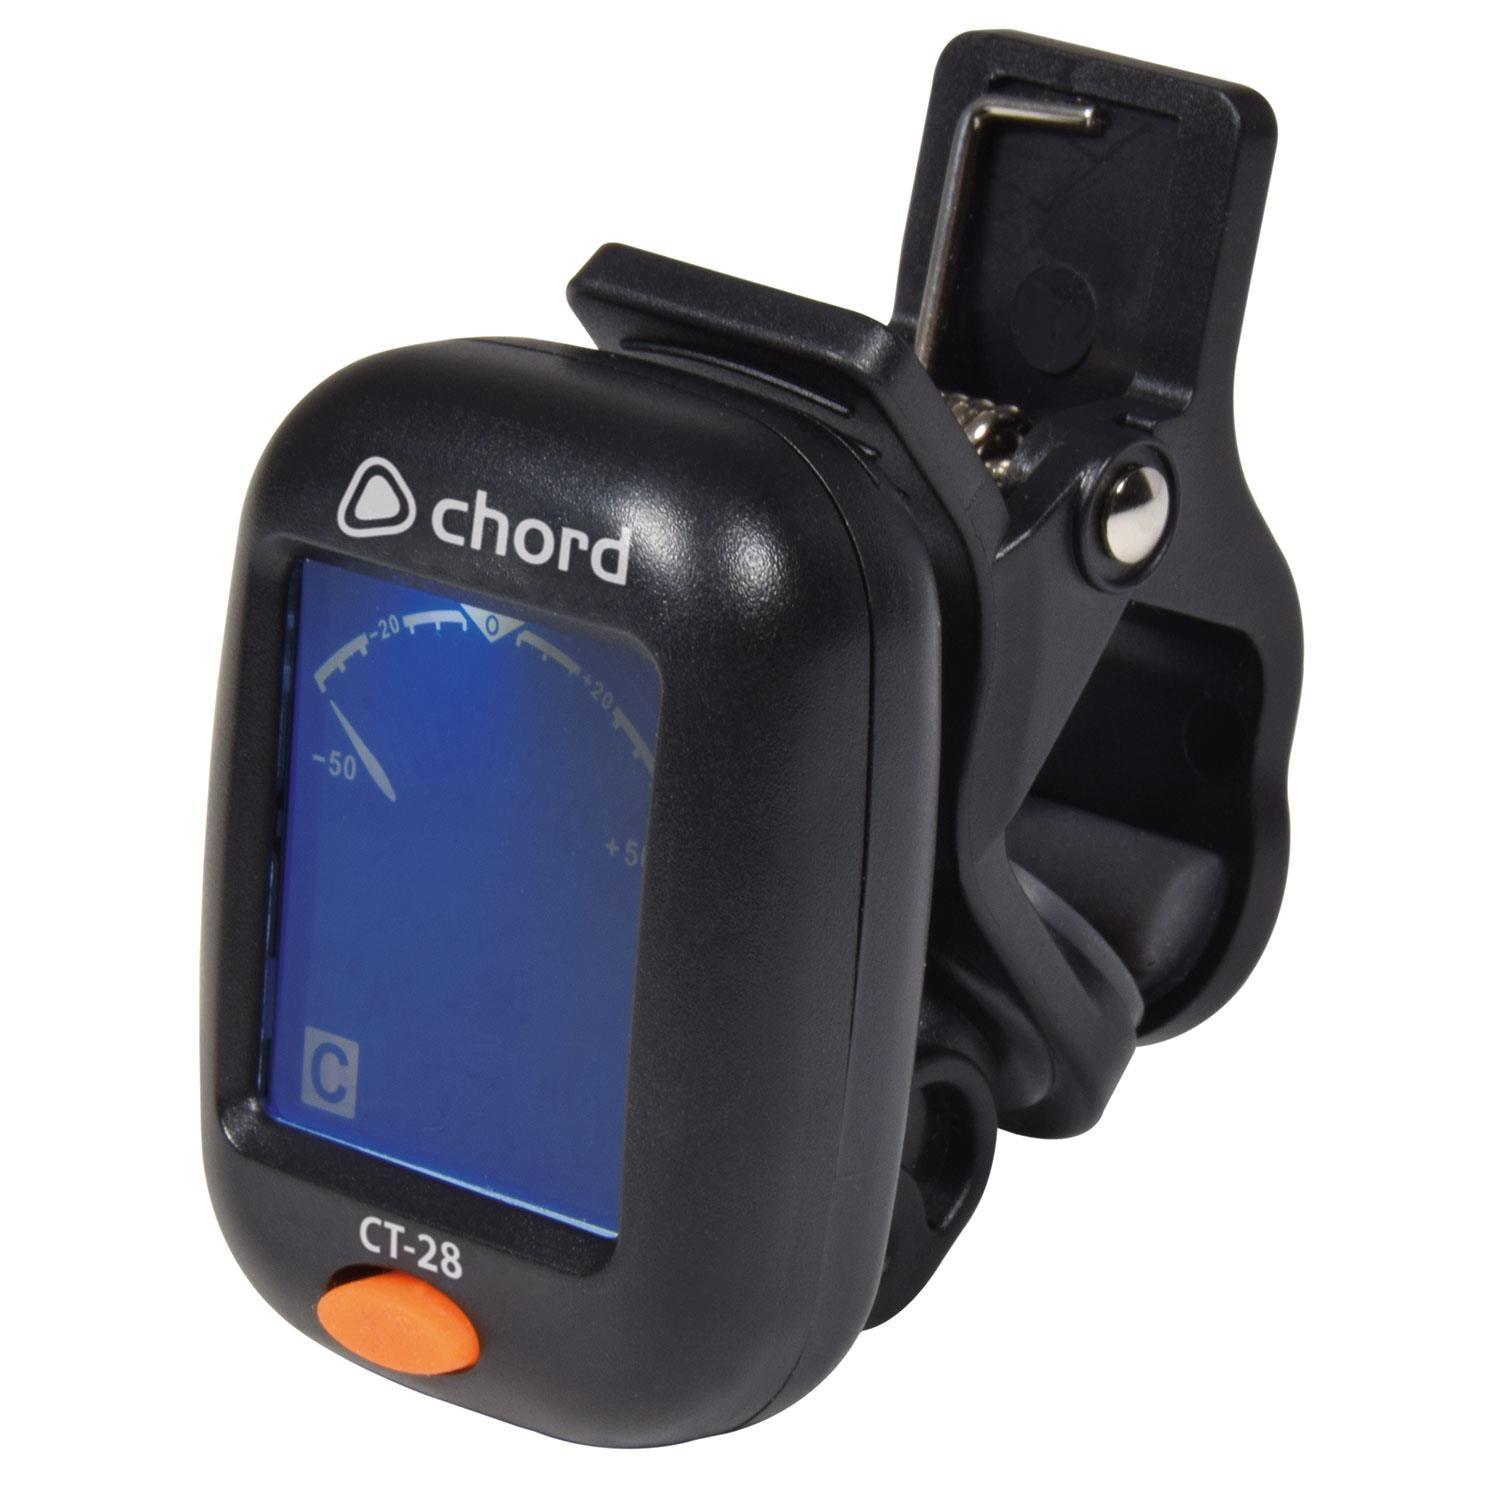 Chord CT-28 Compact Clip Tuner - DY Pro Audio